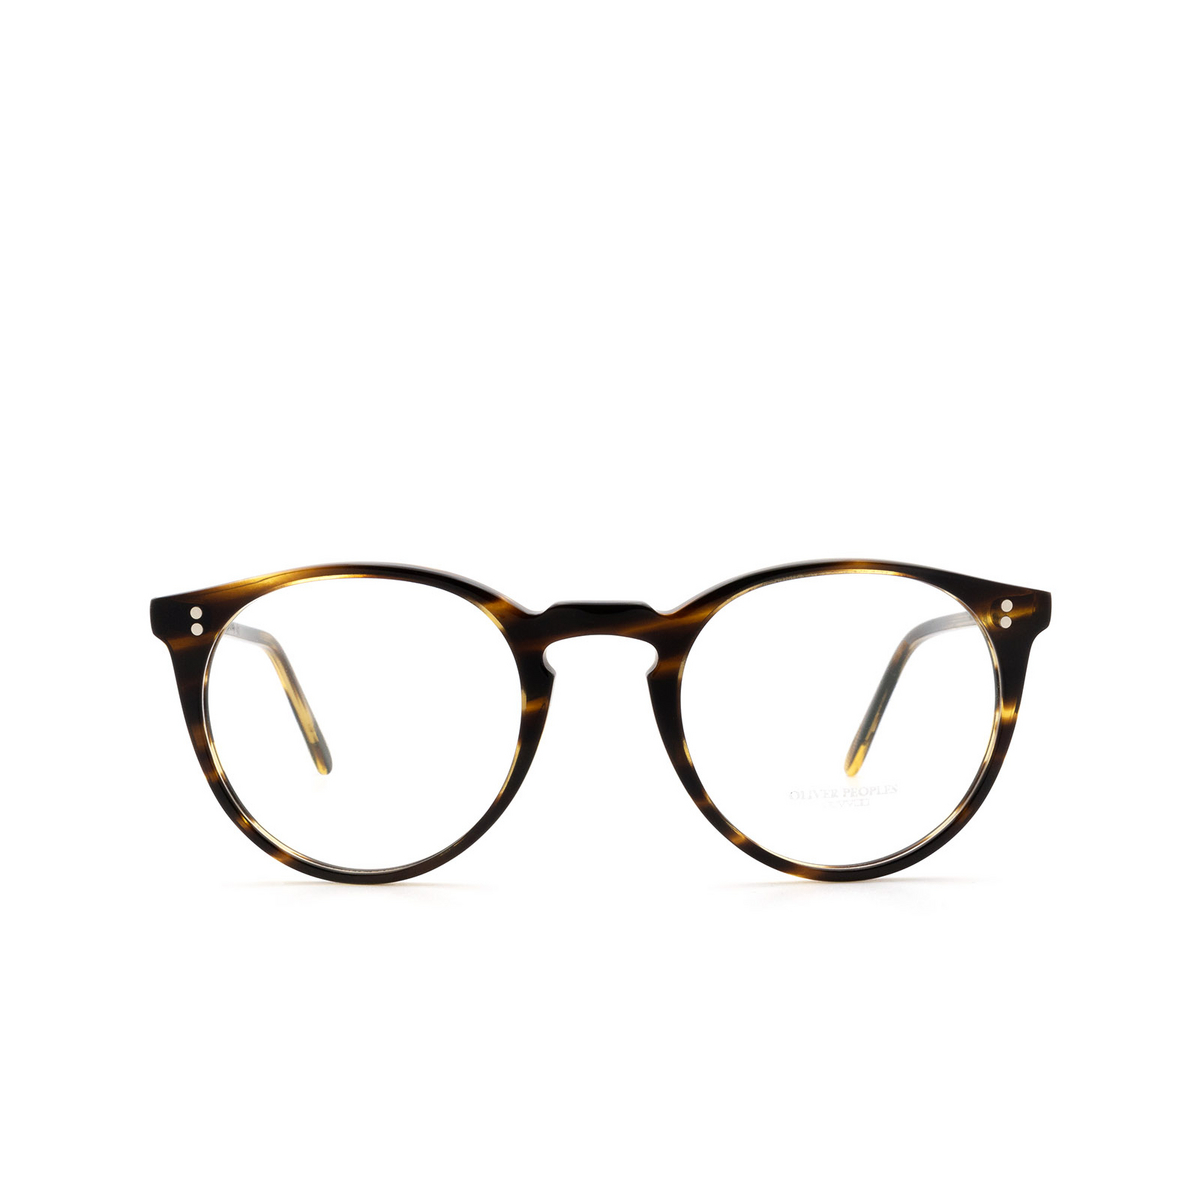 Oliver Peoples O'MALLEY Eyeglasses 1003 Cocobolo - front view